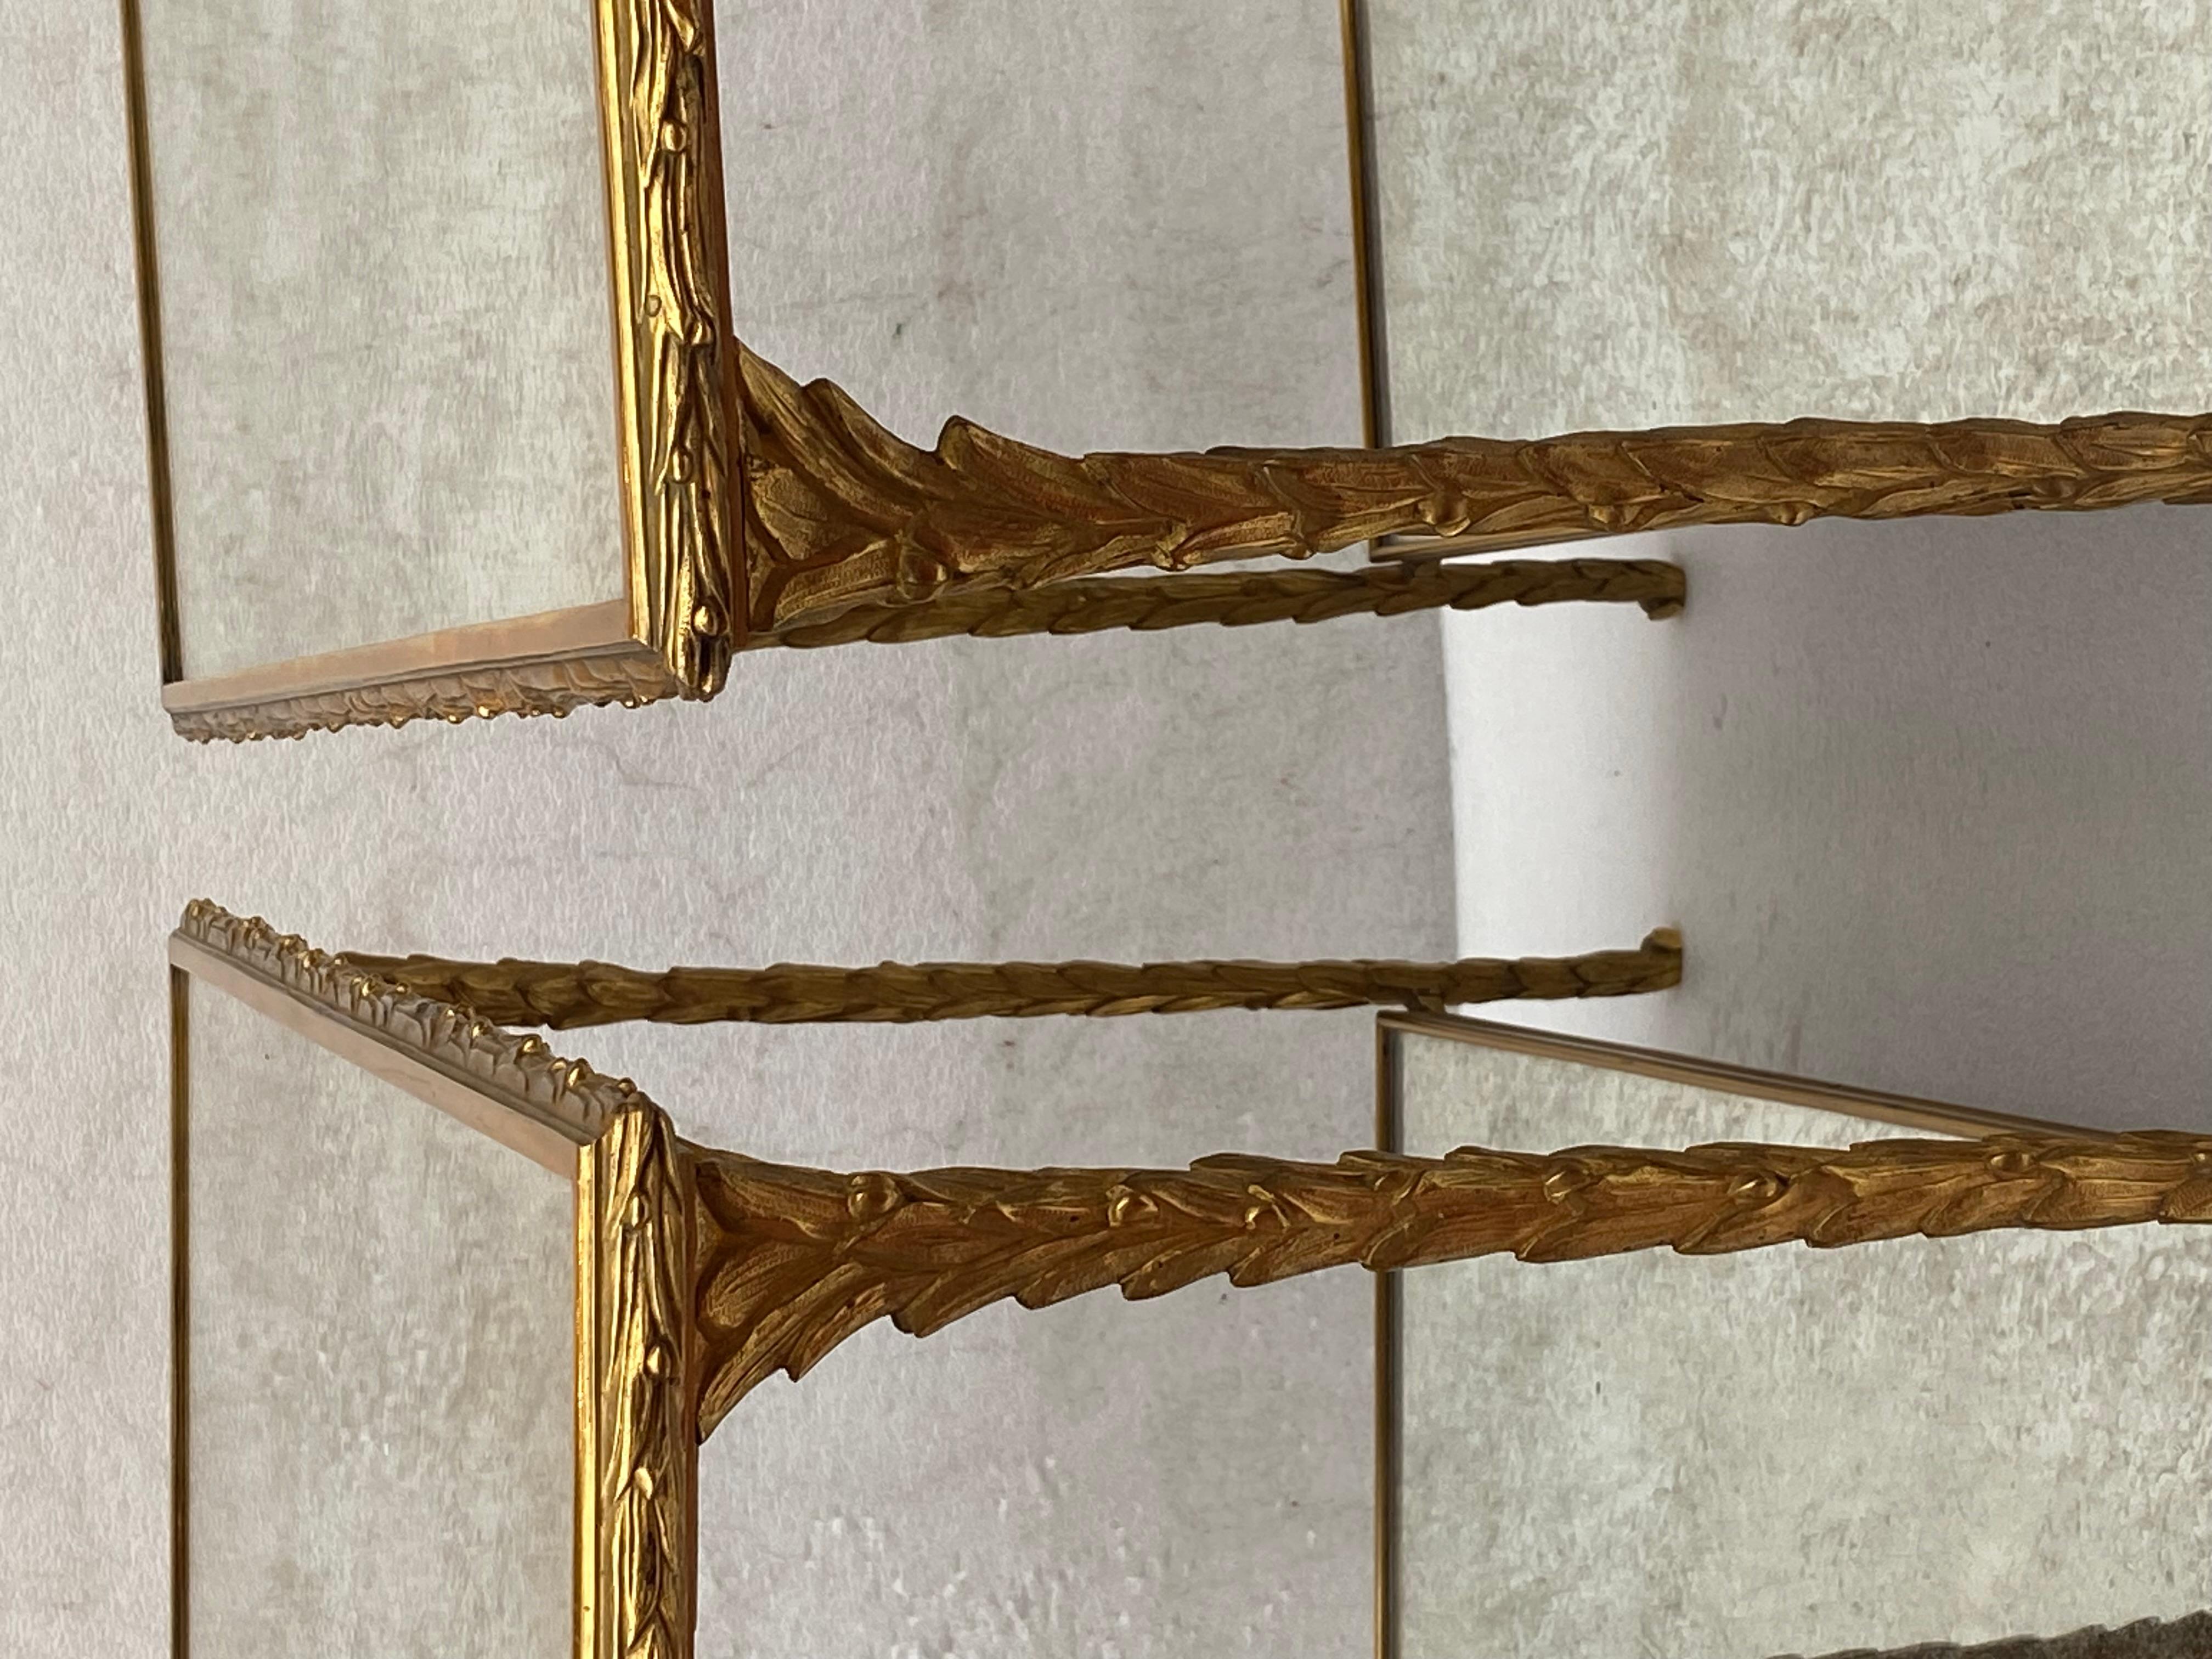 Pair of Maison Charles end tables in gilded bronze with aged mirror top, palm tree decor uprights, Everything is screwed
Circa 1970.
Good condition
Unsigned
Length: 71 cm
Width: 32 cm
Height: 54 cm